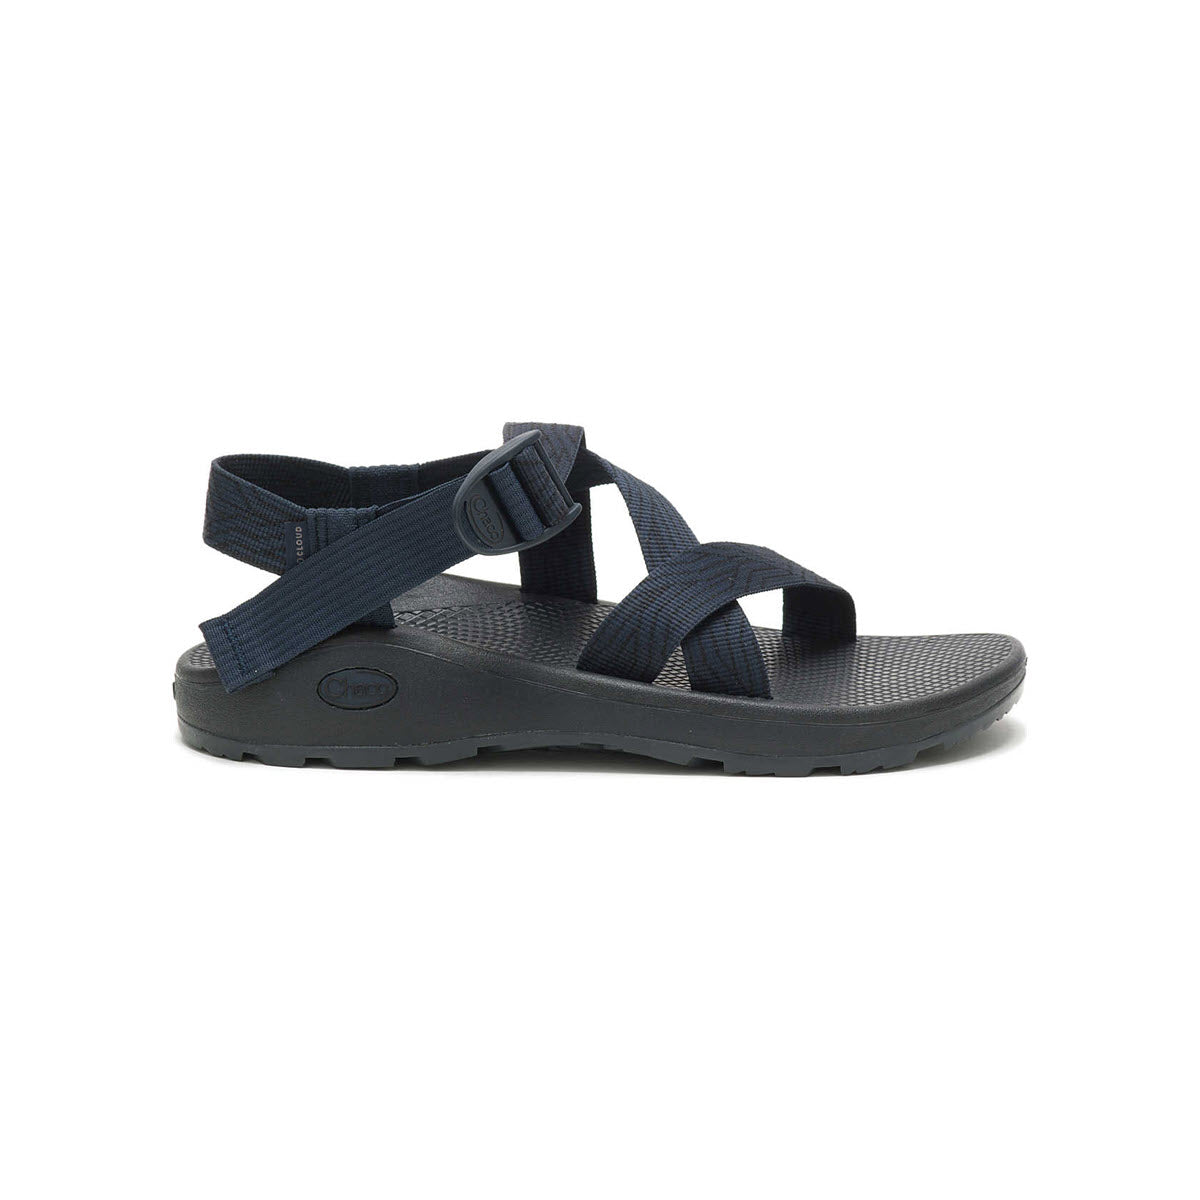 Navy blue sports sandal with a customizable strap design and a textured sole, displayed against a white background, Z CLOUD SANDAL SERPENT NAVY - MENS by Chaco.